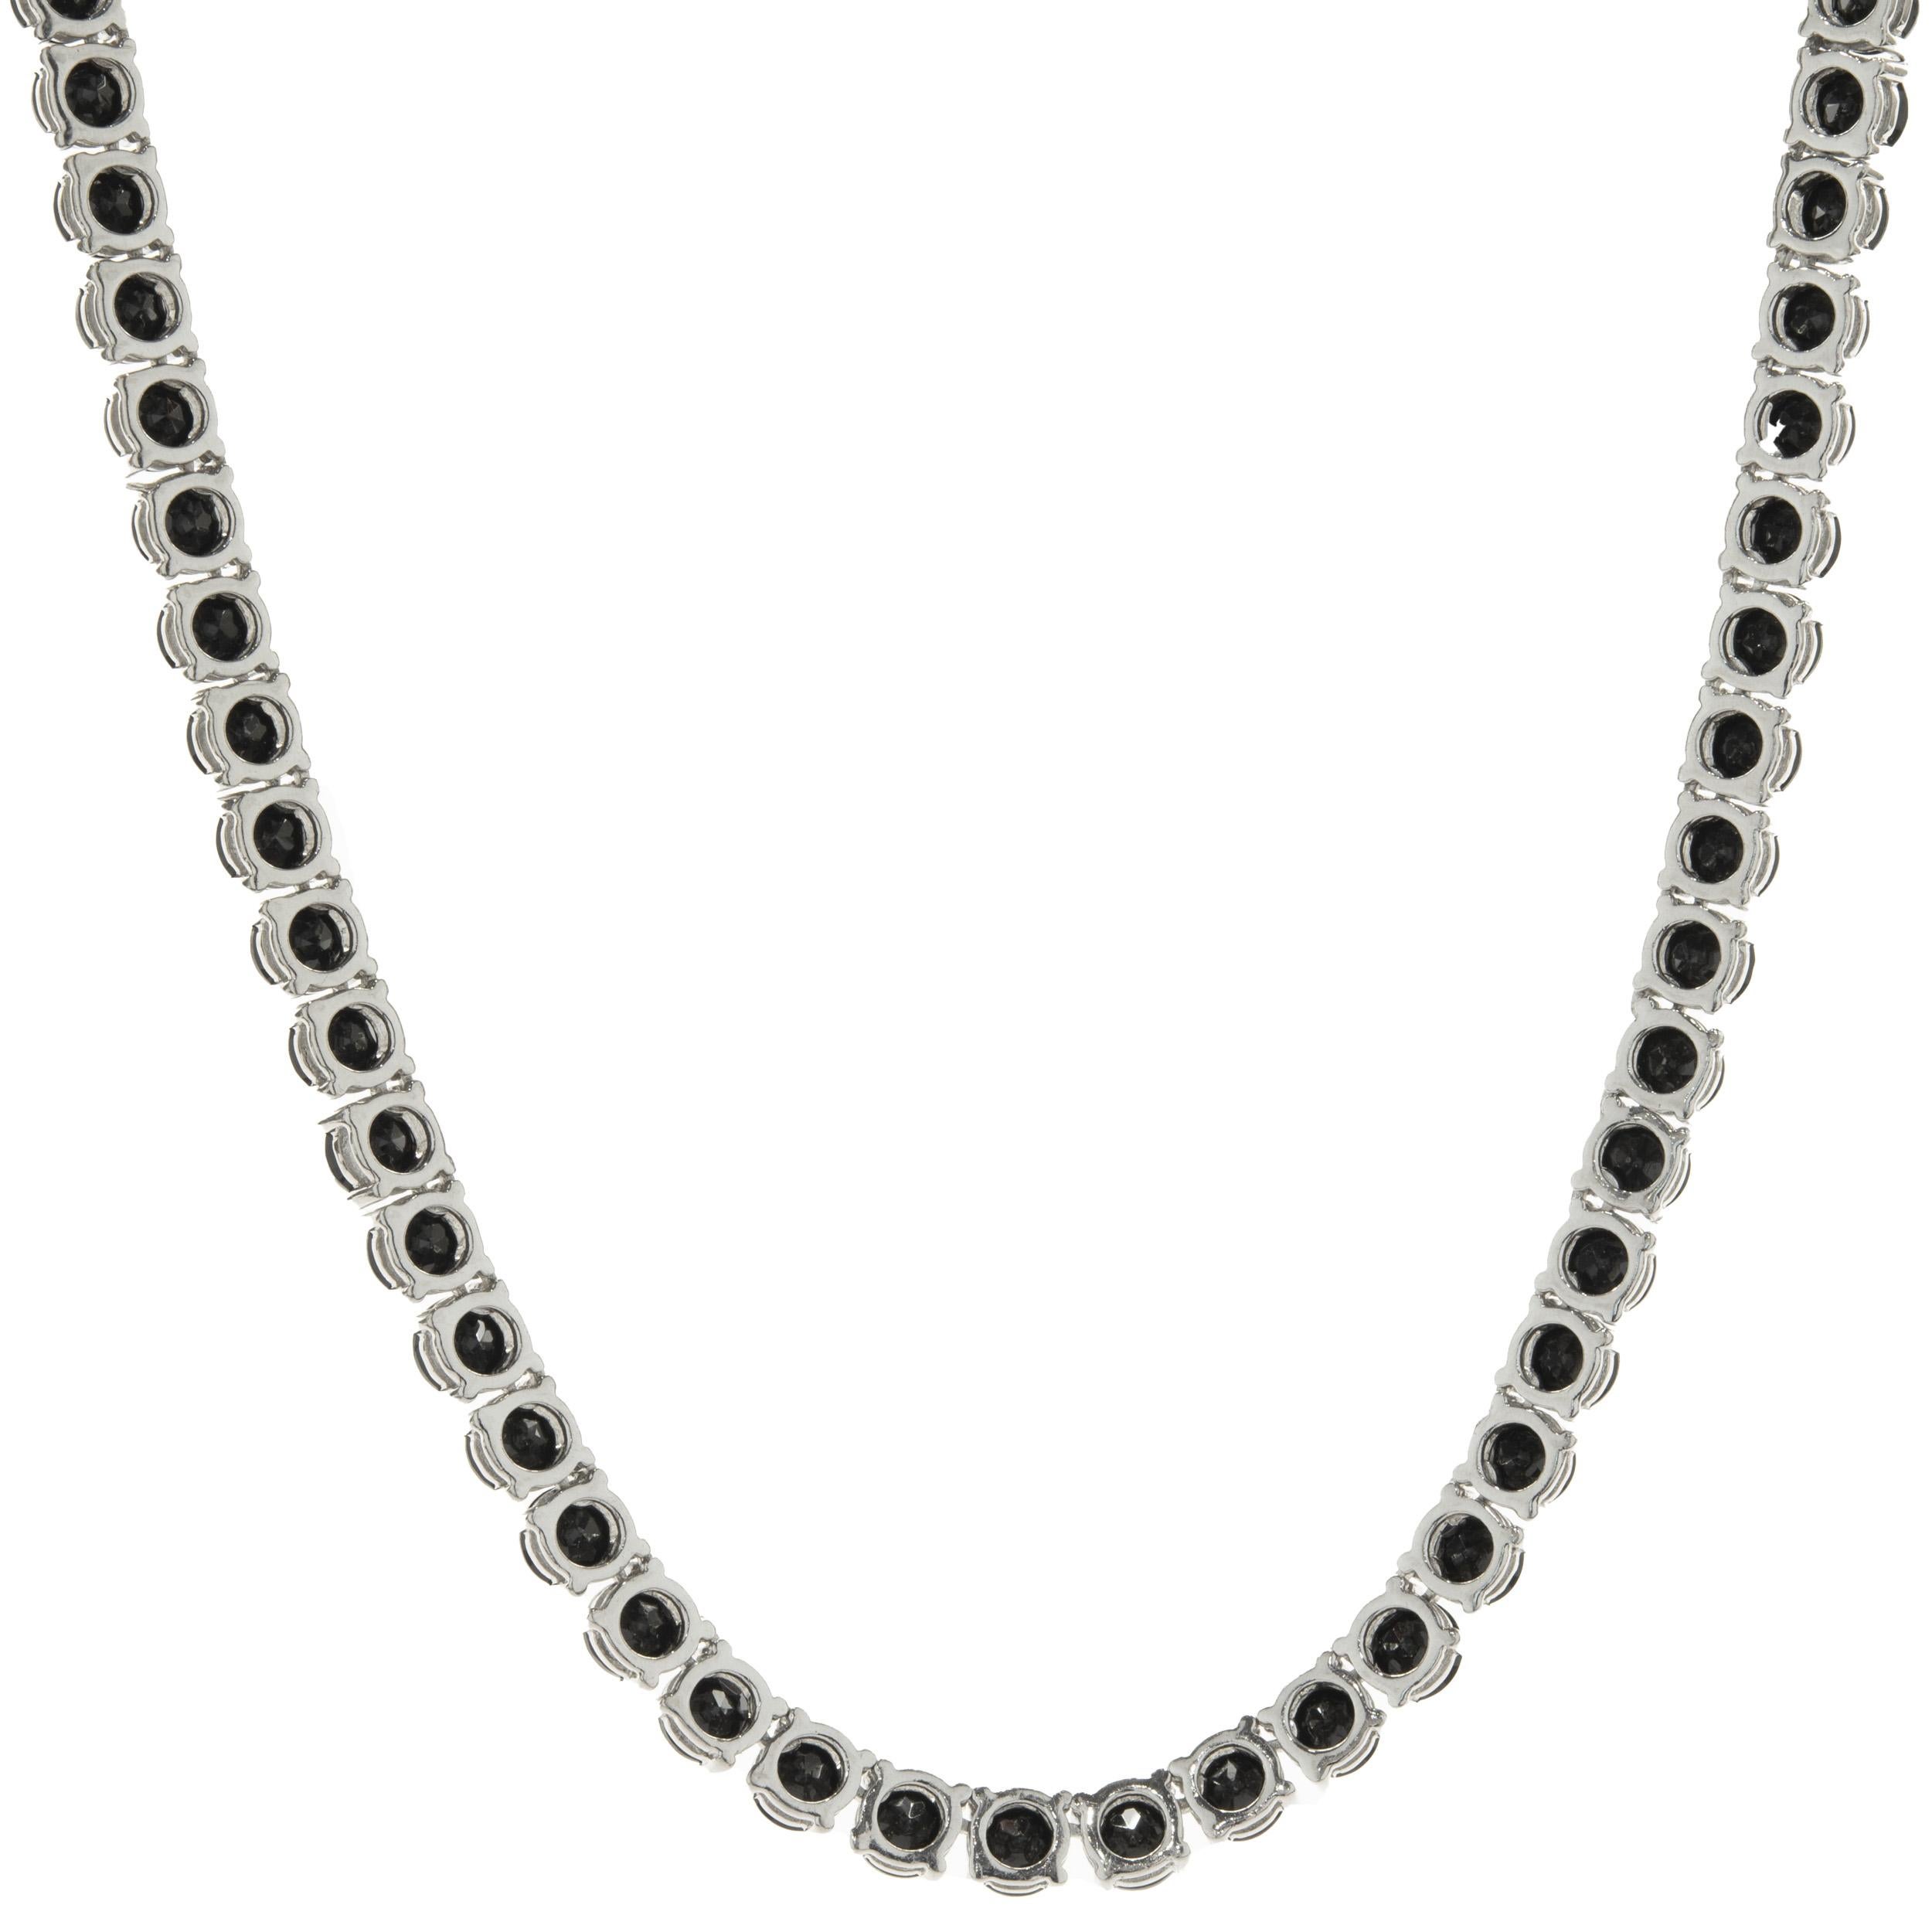 Designer: custom 
Material: sterling silver
Dimensions: necklace measures 20-inches long 
Weight: 42.85 grams